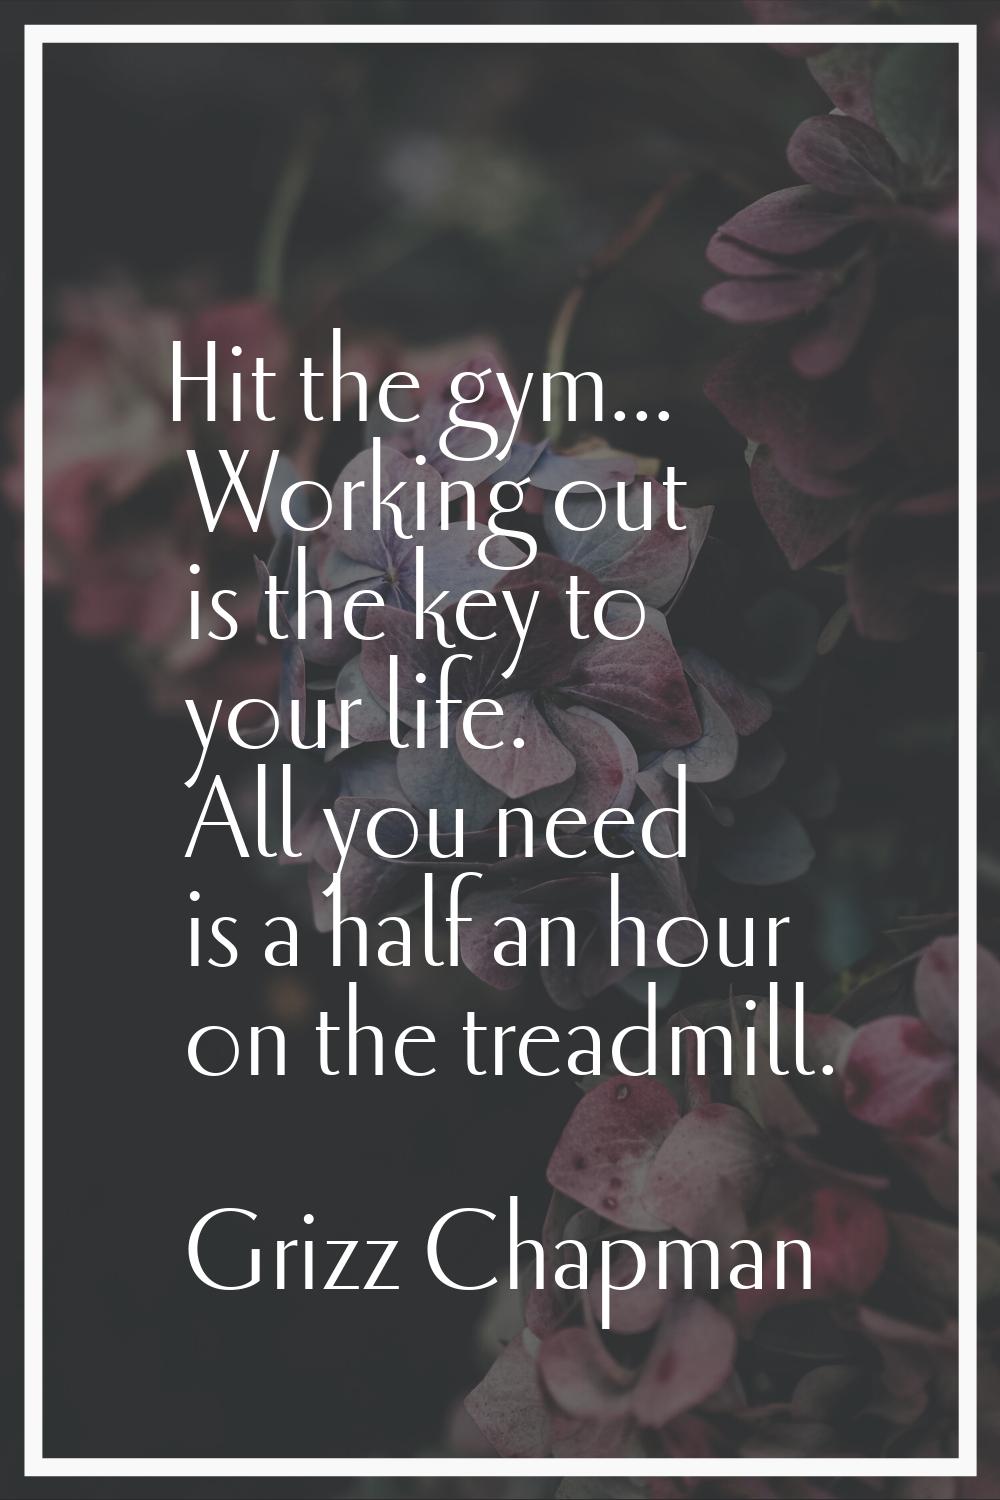 Hit the gym... Working out is the key to your life. All you need is a half an hour on the treadmill